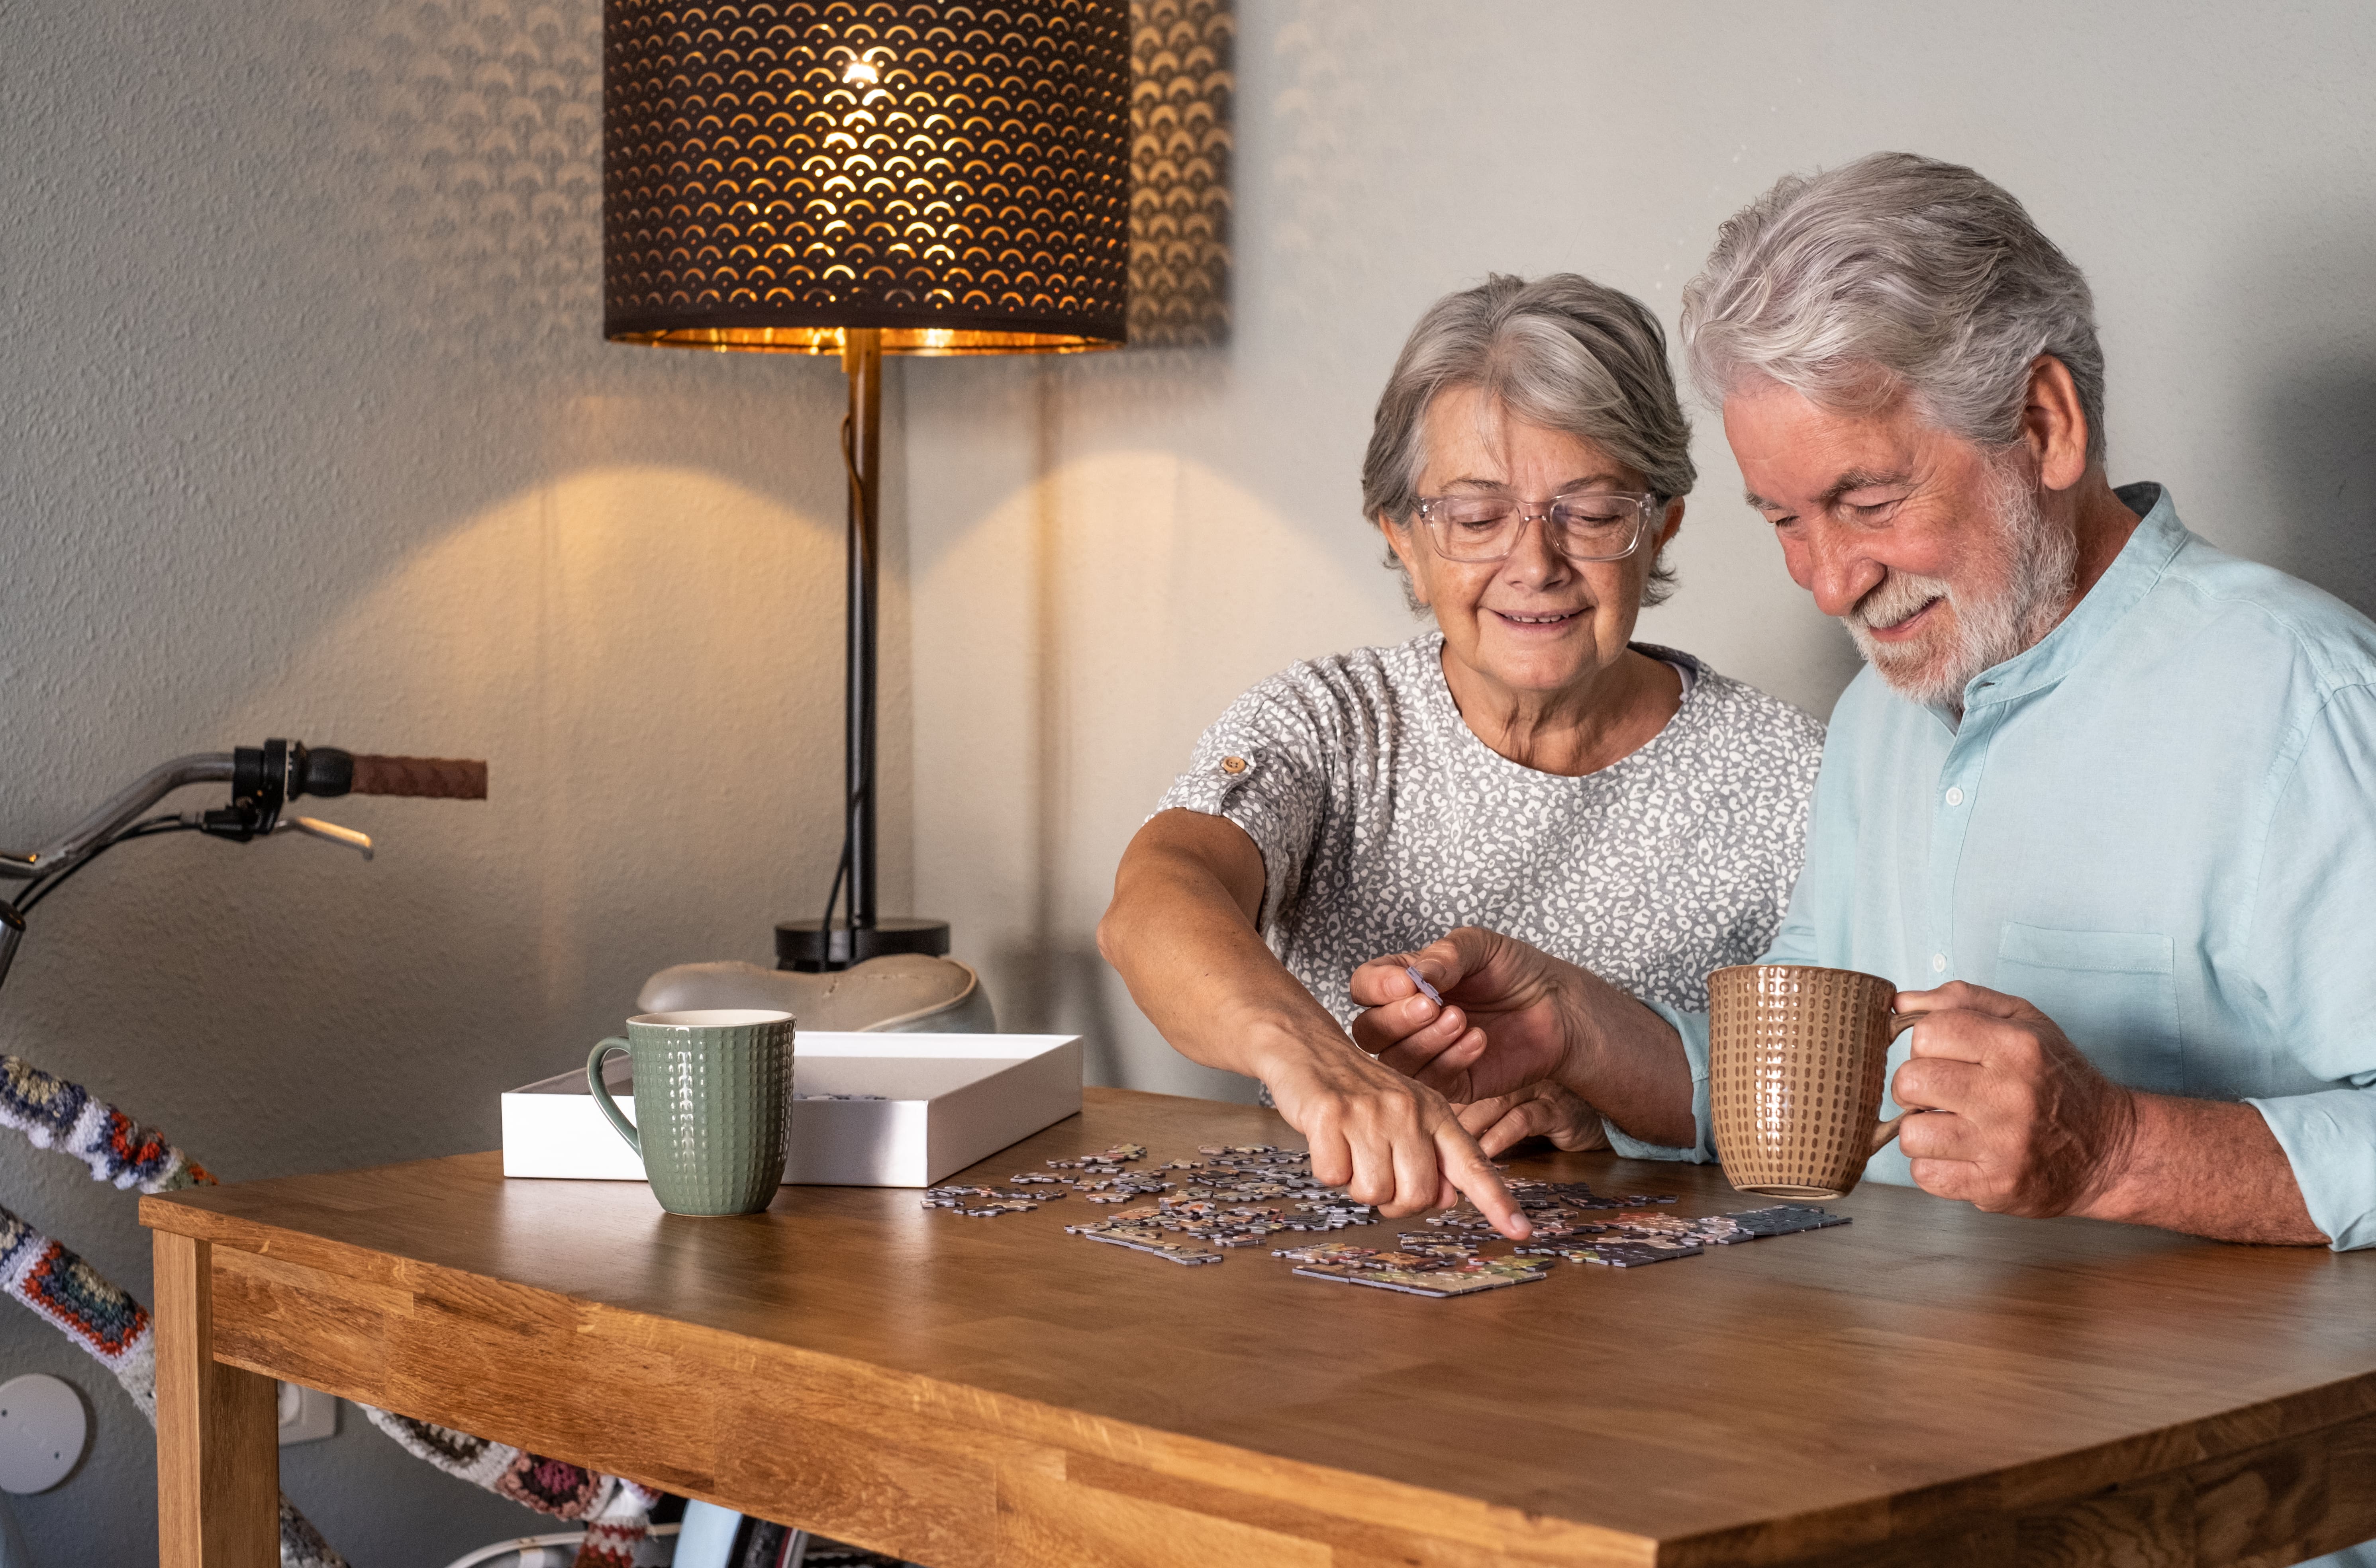 An older couple doing a puzzle together